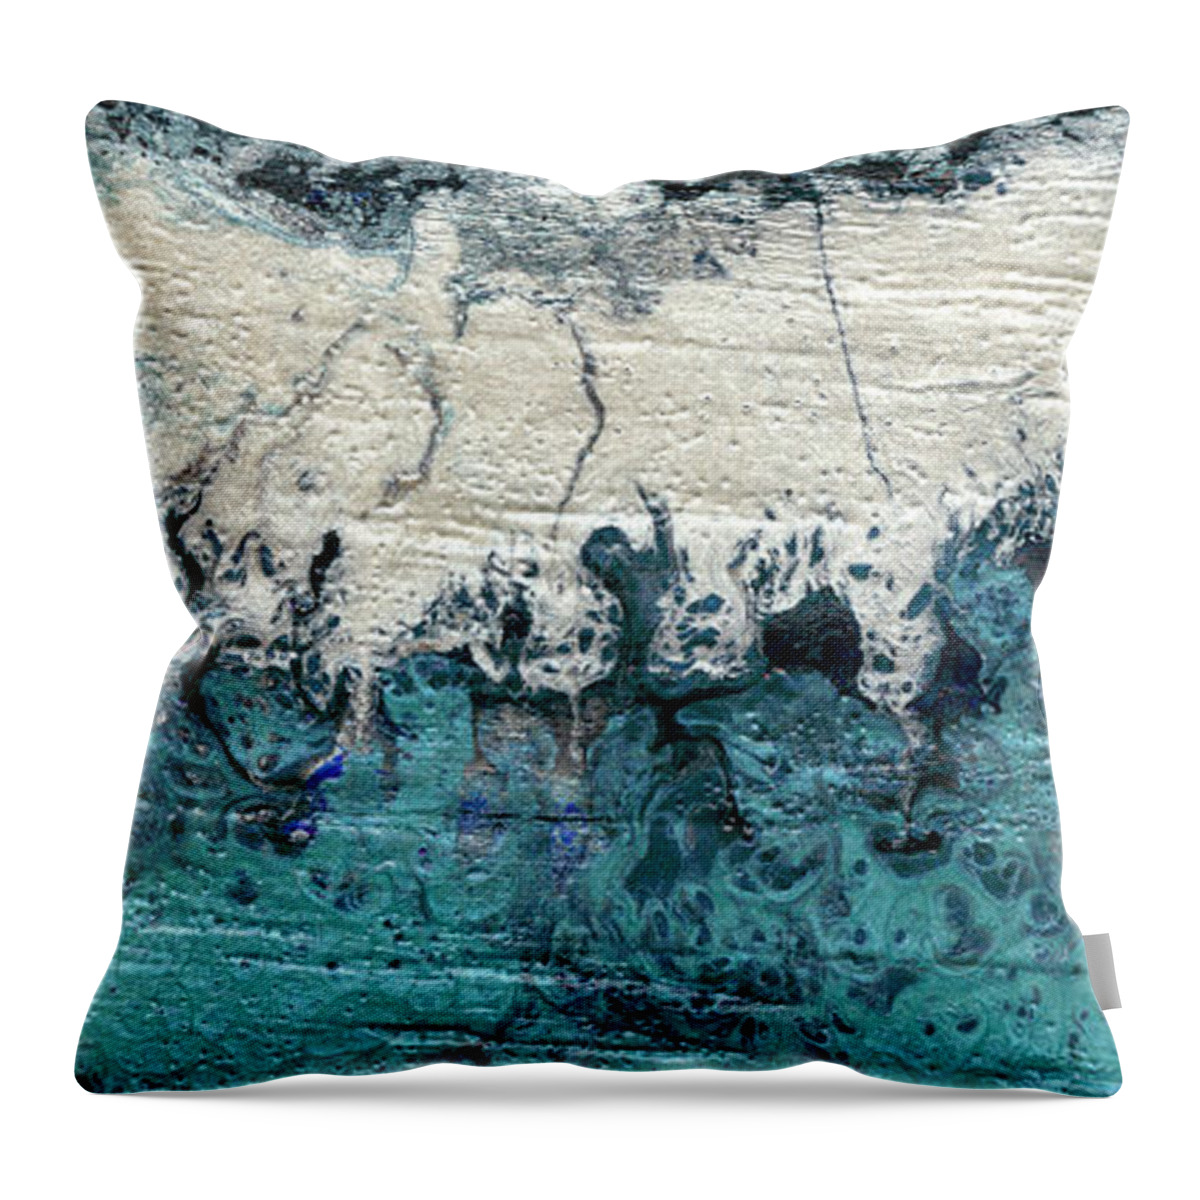 Abstract Throw Pillow featuring the painting Bering Strait I by Alicia Ludwig